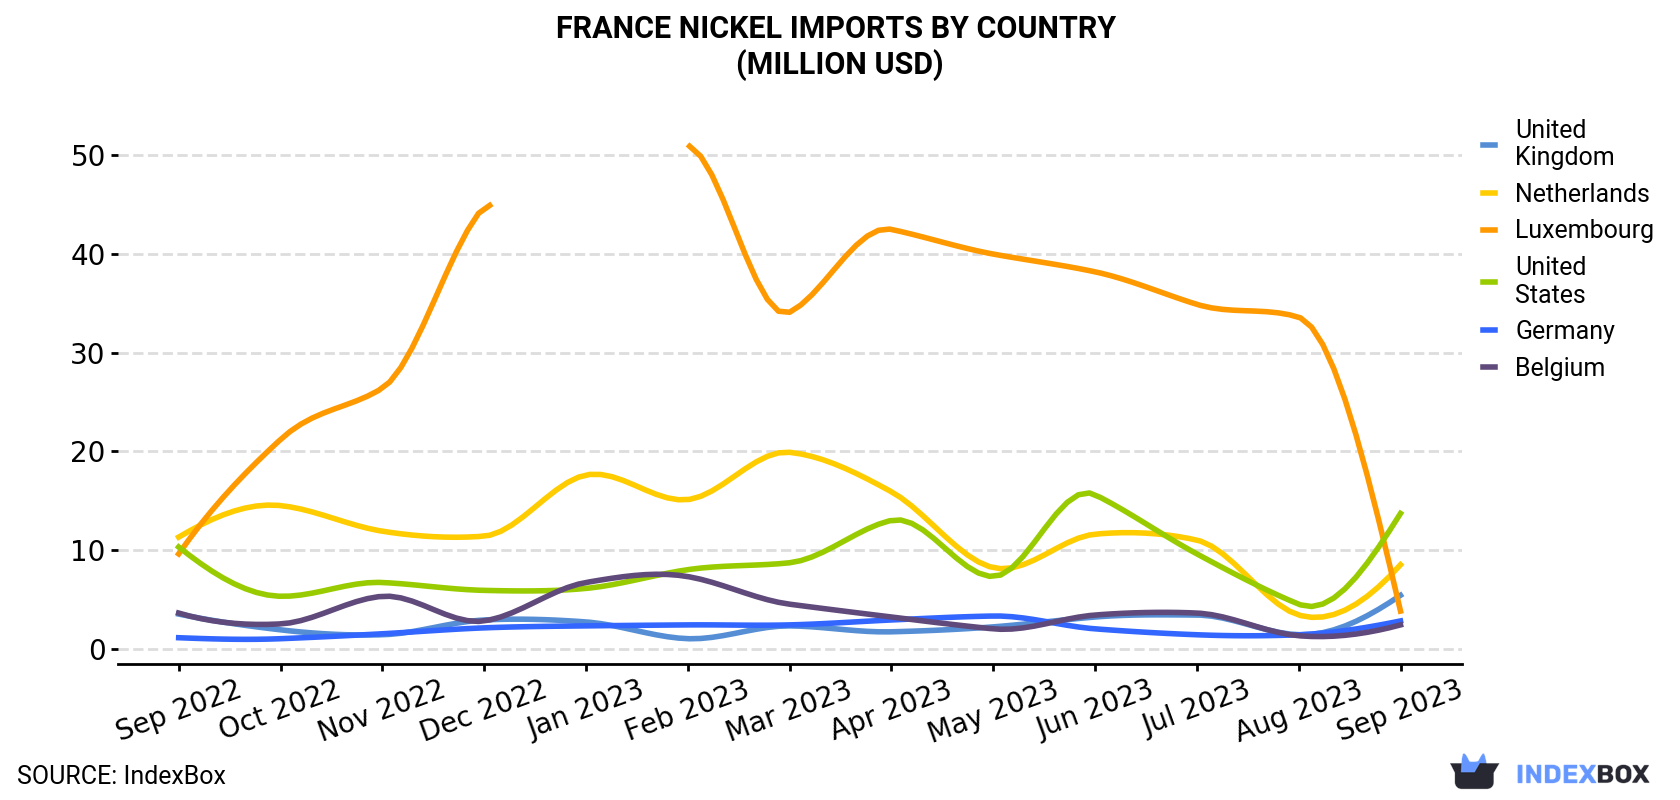 France Nickel Imports By Country (Million USD)